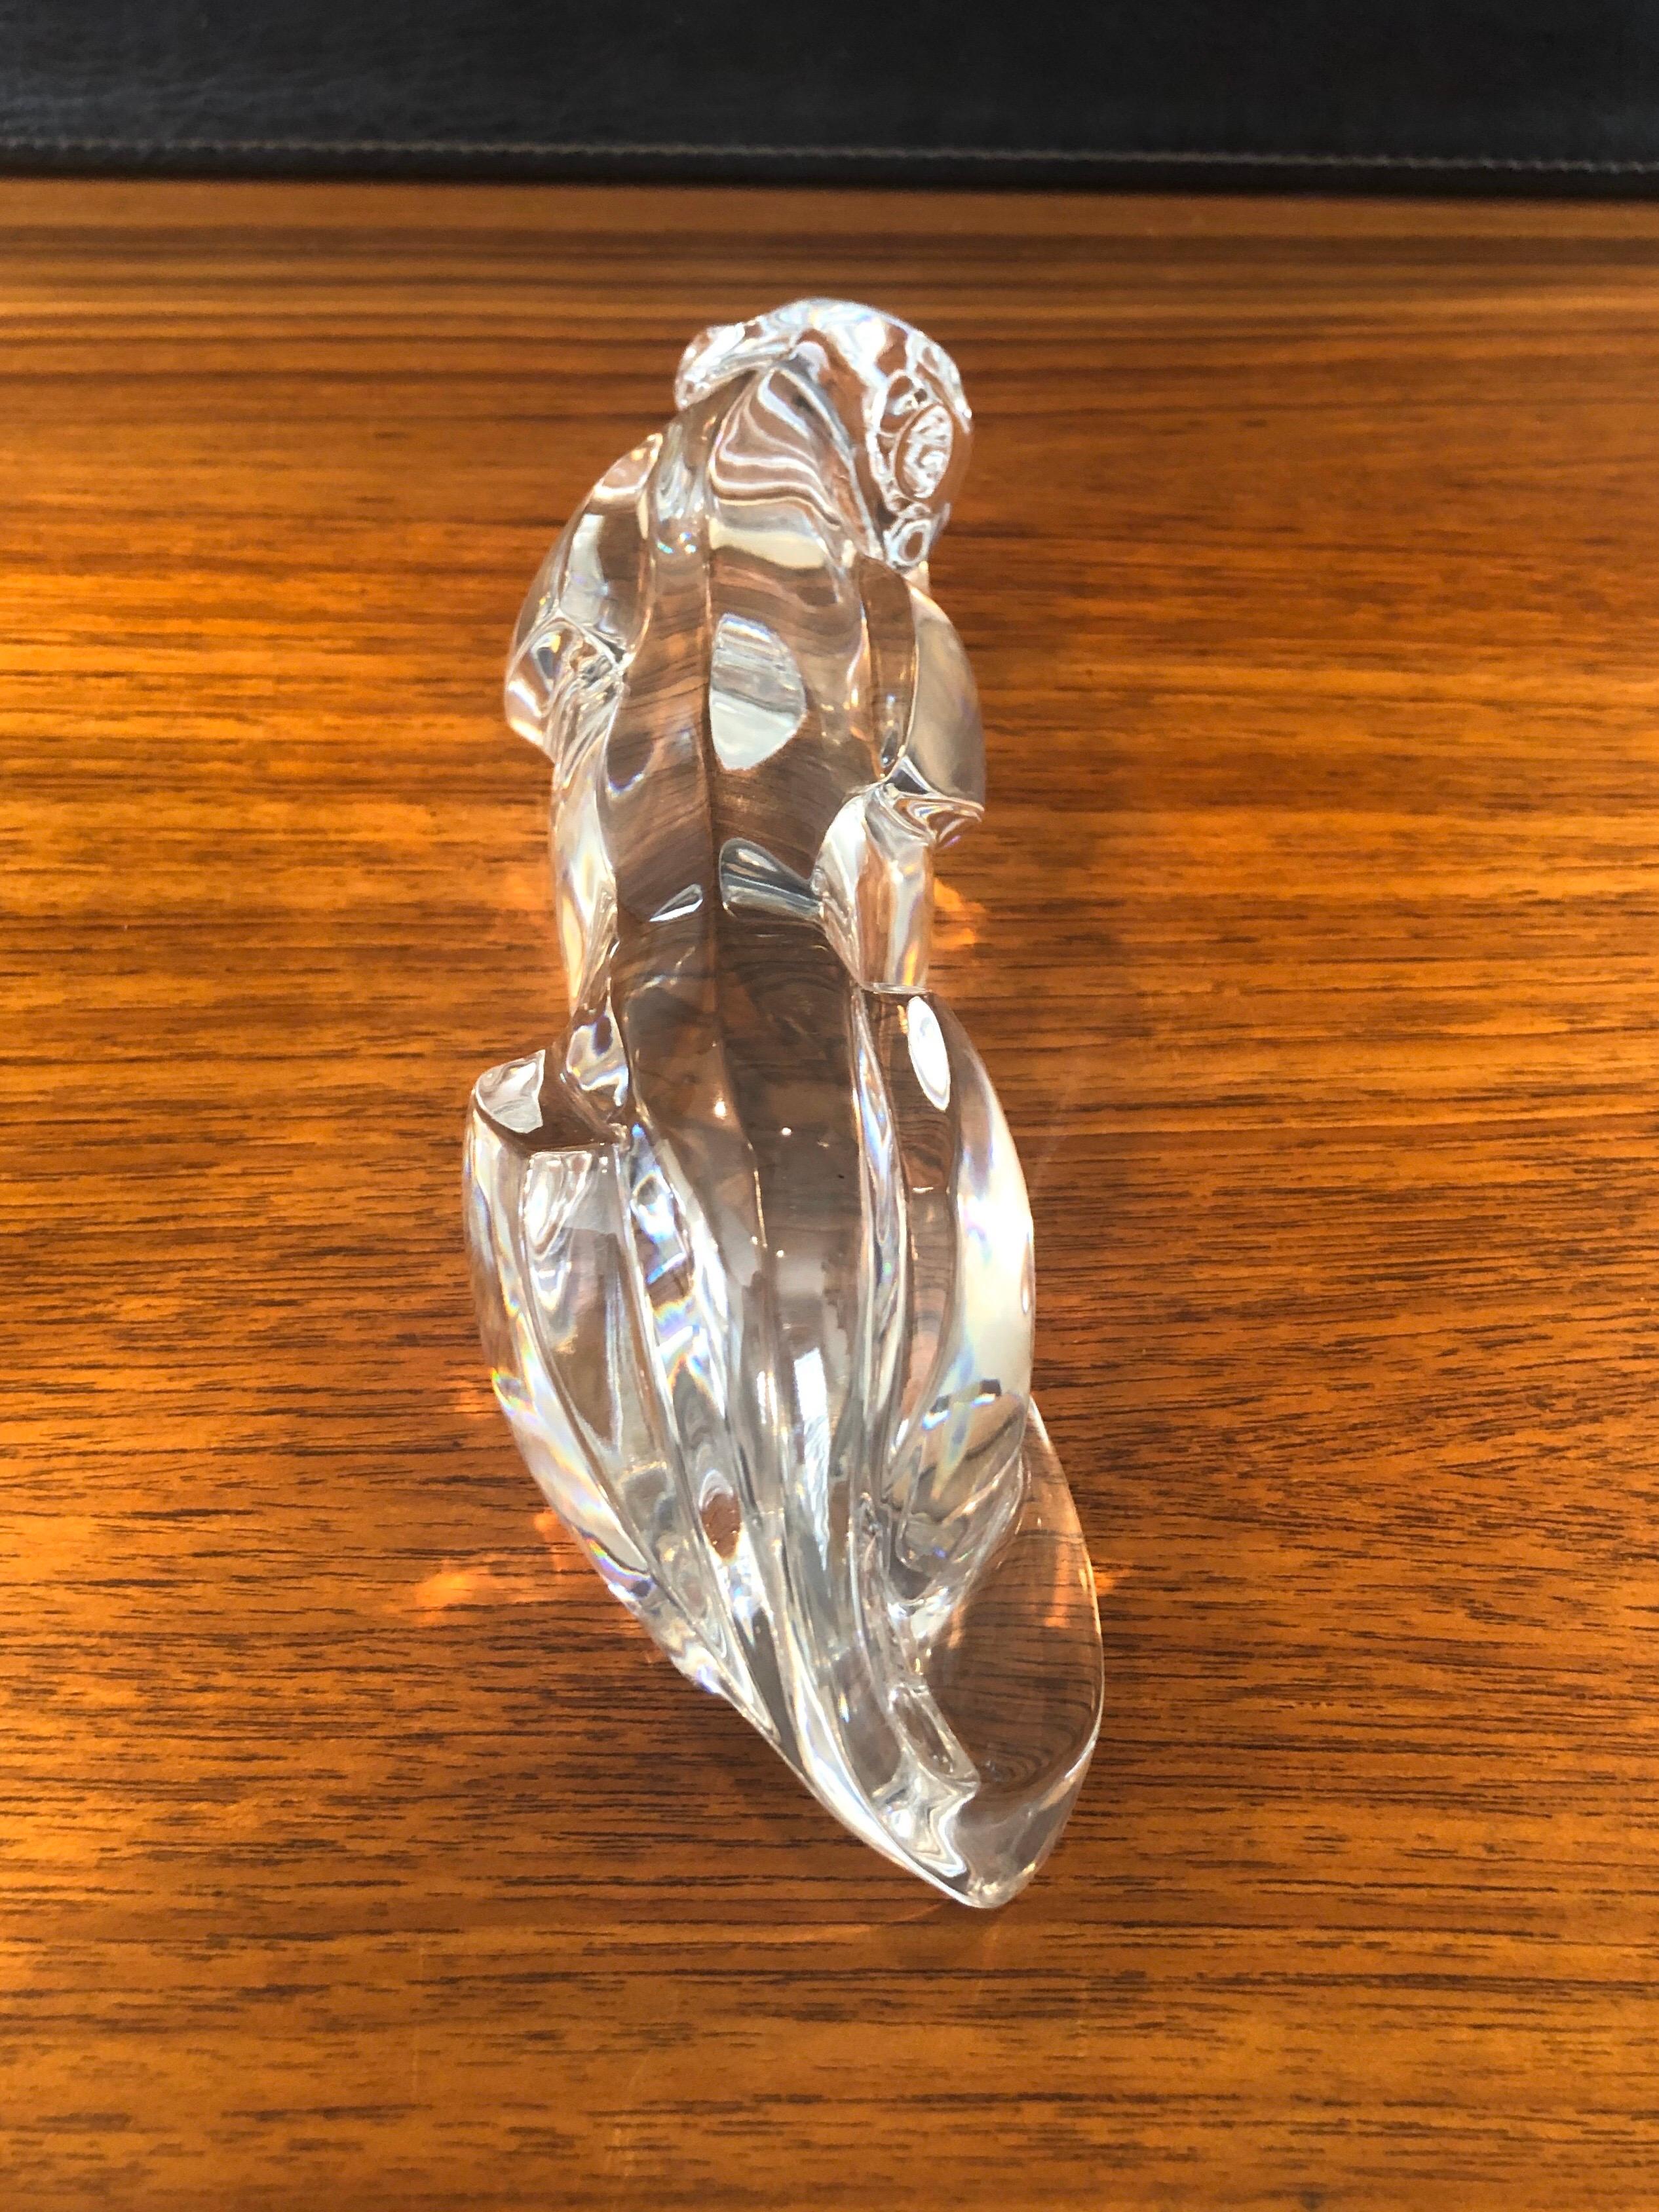 Gorgeous stylized crystal panther / jaguar sculpture by Baccarat, circa 1990s. The piece is in excellent condition with no visible imperfections and has great clarity. Signed on the lower right, the piece measures 10.25